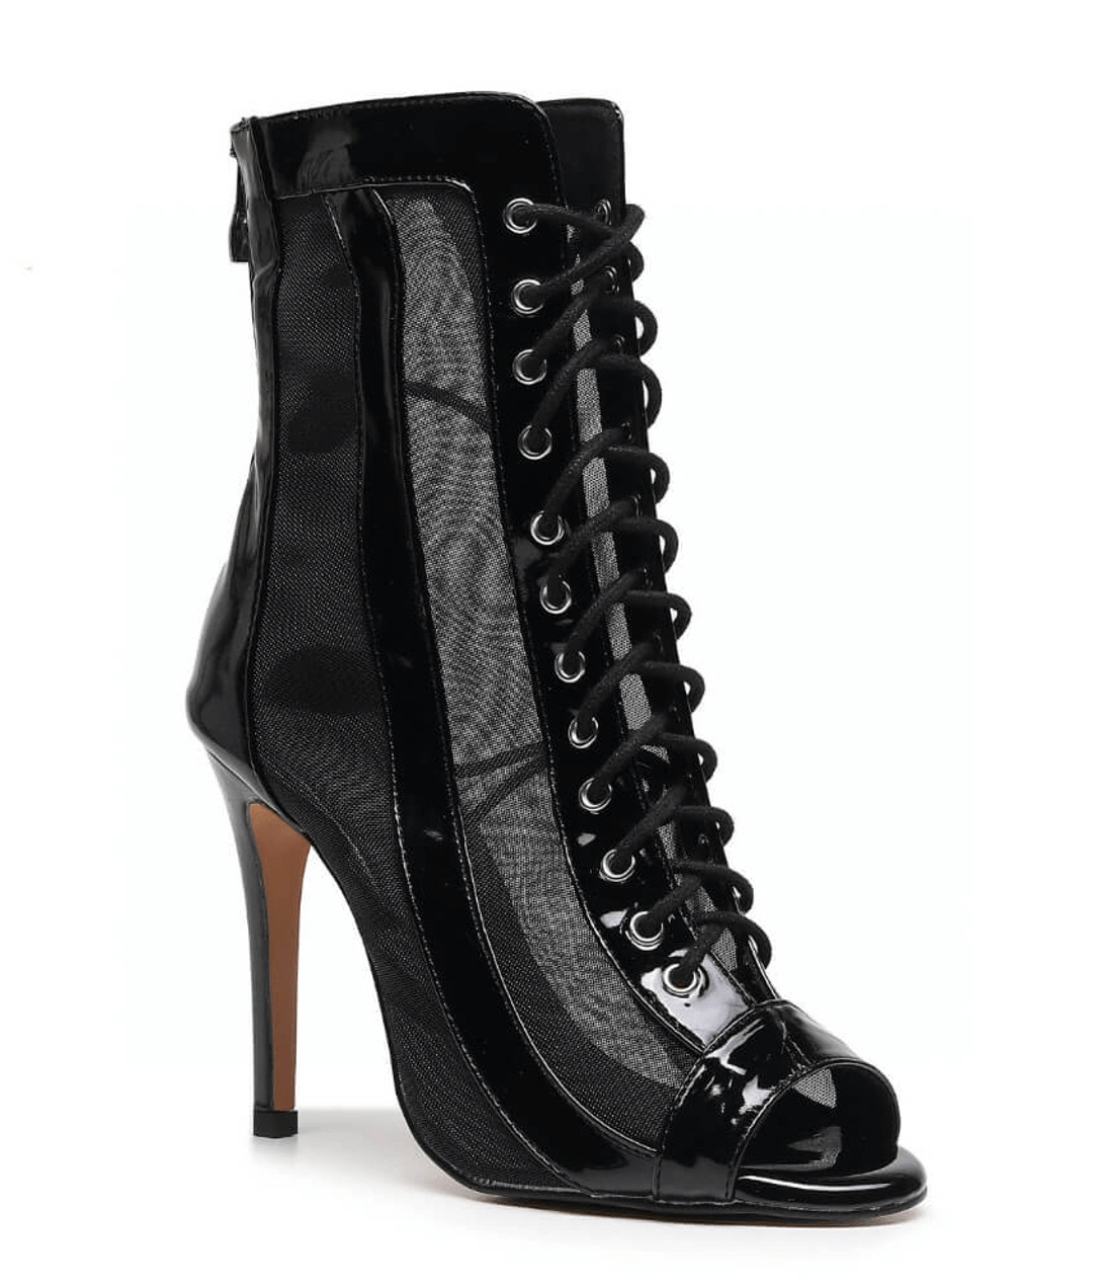 Dance Heels for Women Dressy Open Toe Lace Up Mesh Booties Stiletto High  Heeled Peep Toe Sandals Gladiator Ankle Boots for Wedding Party Dance Shoes,  A-black, 10 : Amazon.ca: Sports & Outdoors